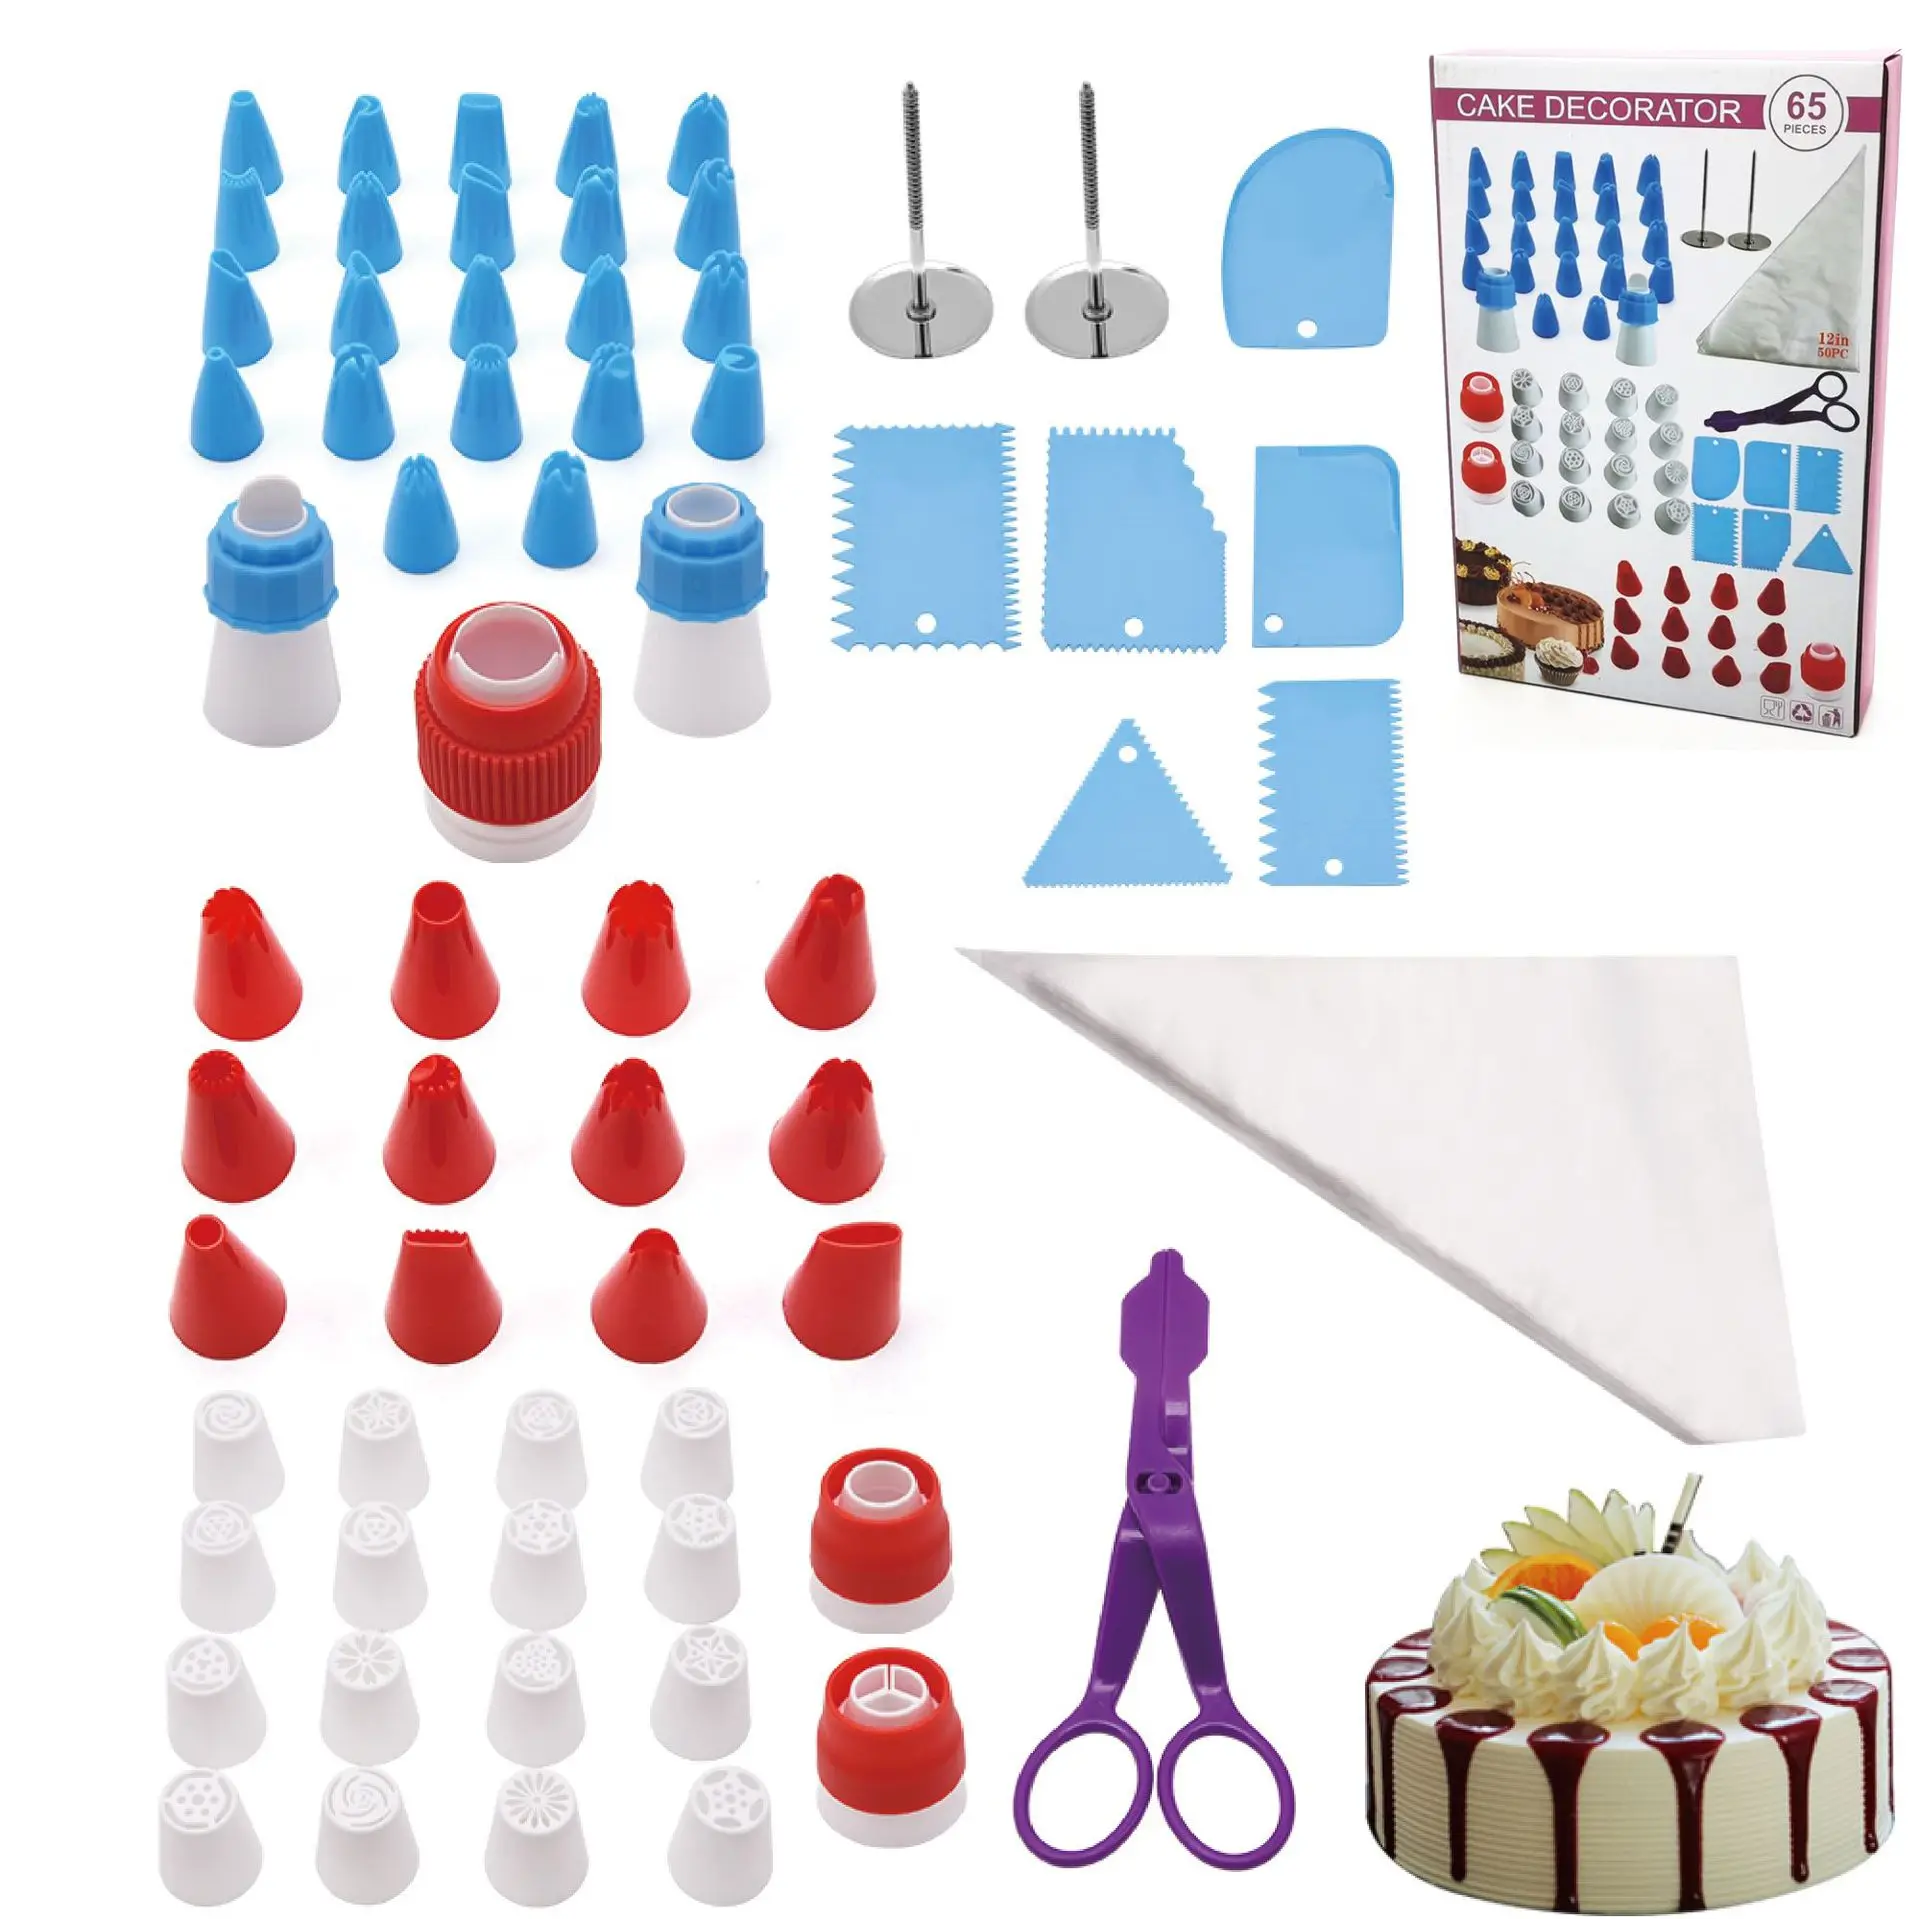 

China Manufacture 2021 Baking Pastry Tool Plastic Frosting Piping Bag Non-Stick Cake Making Tools Set Of Decorative Tools